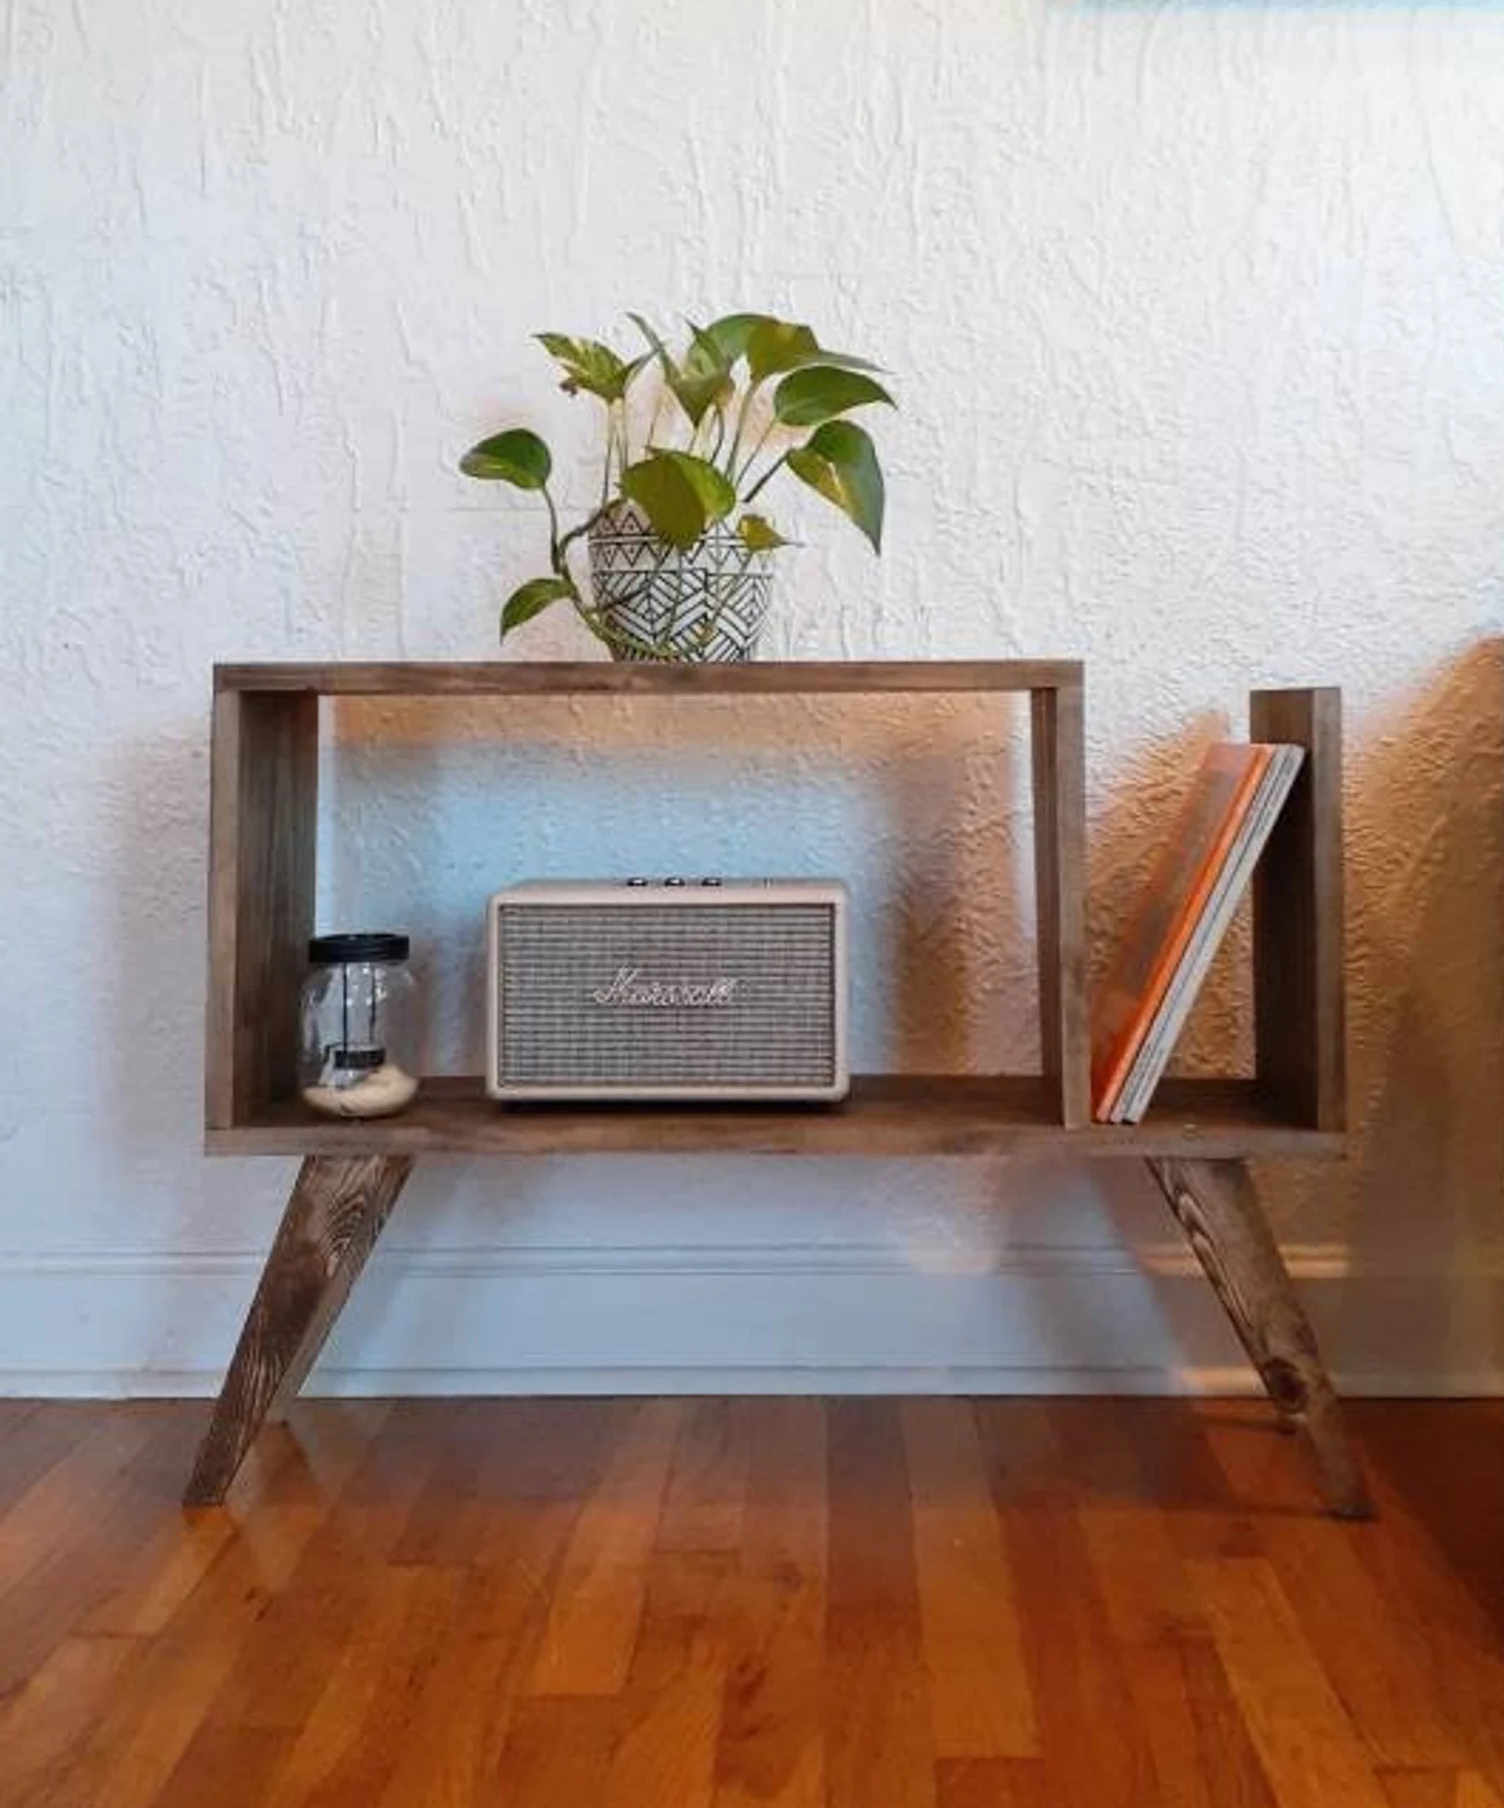 the wooden table holding a vintage radio, jar, plant, and records